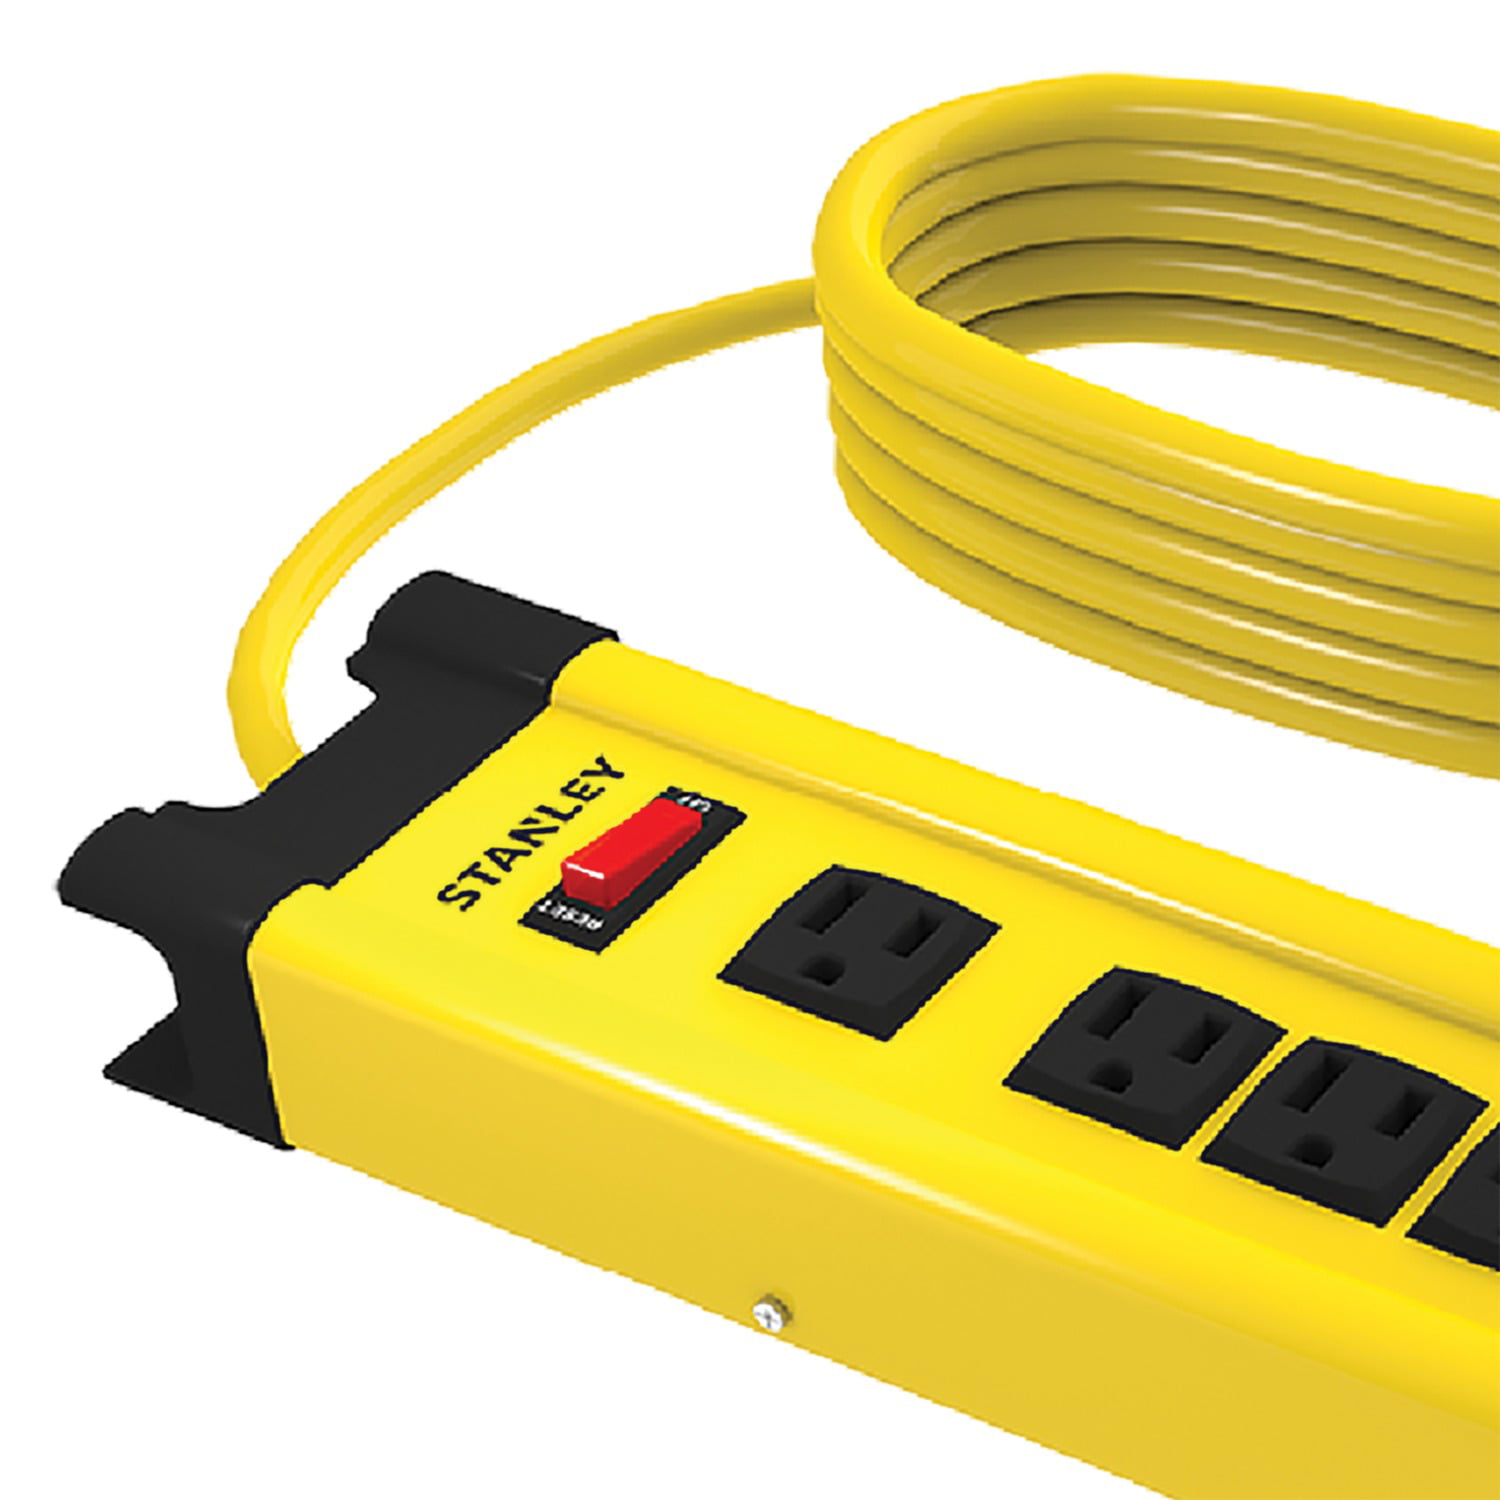 Stanley Tools Shopmax Pro 12-outlet Surge-protector Power Bar, 6-foot Cord  : Target